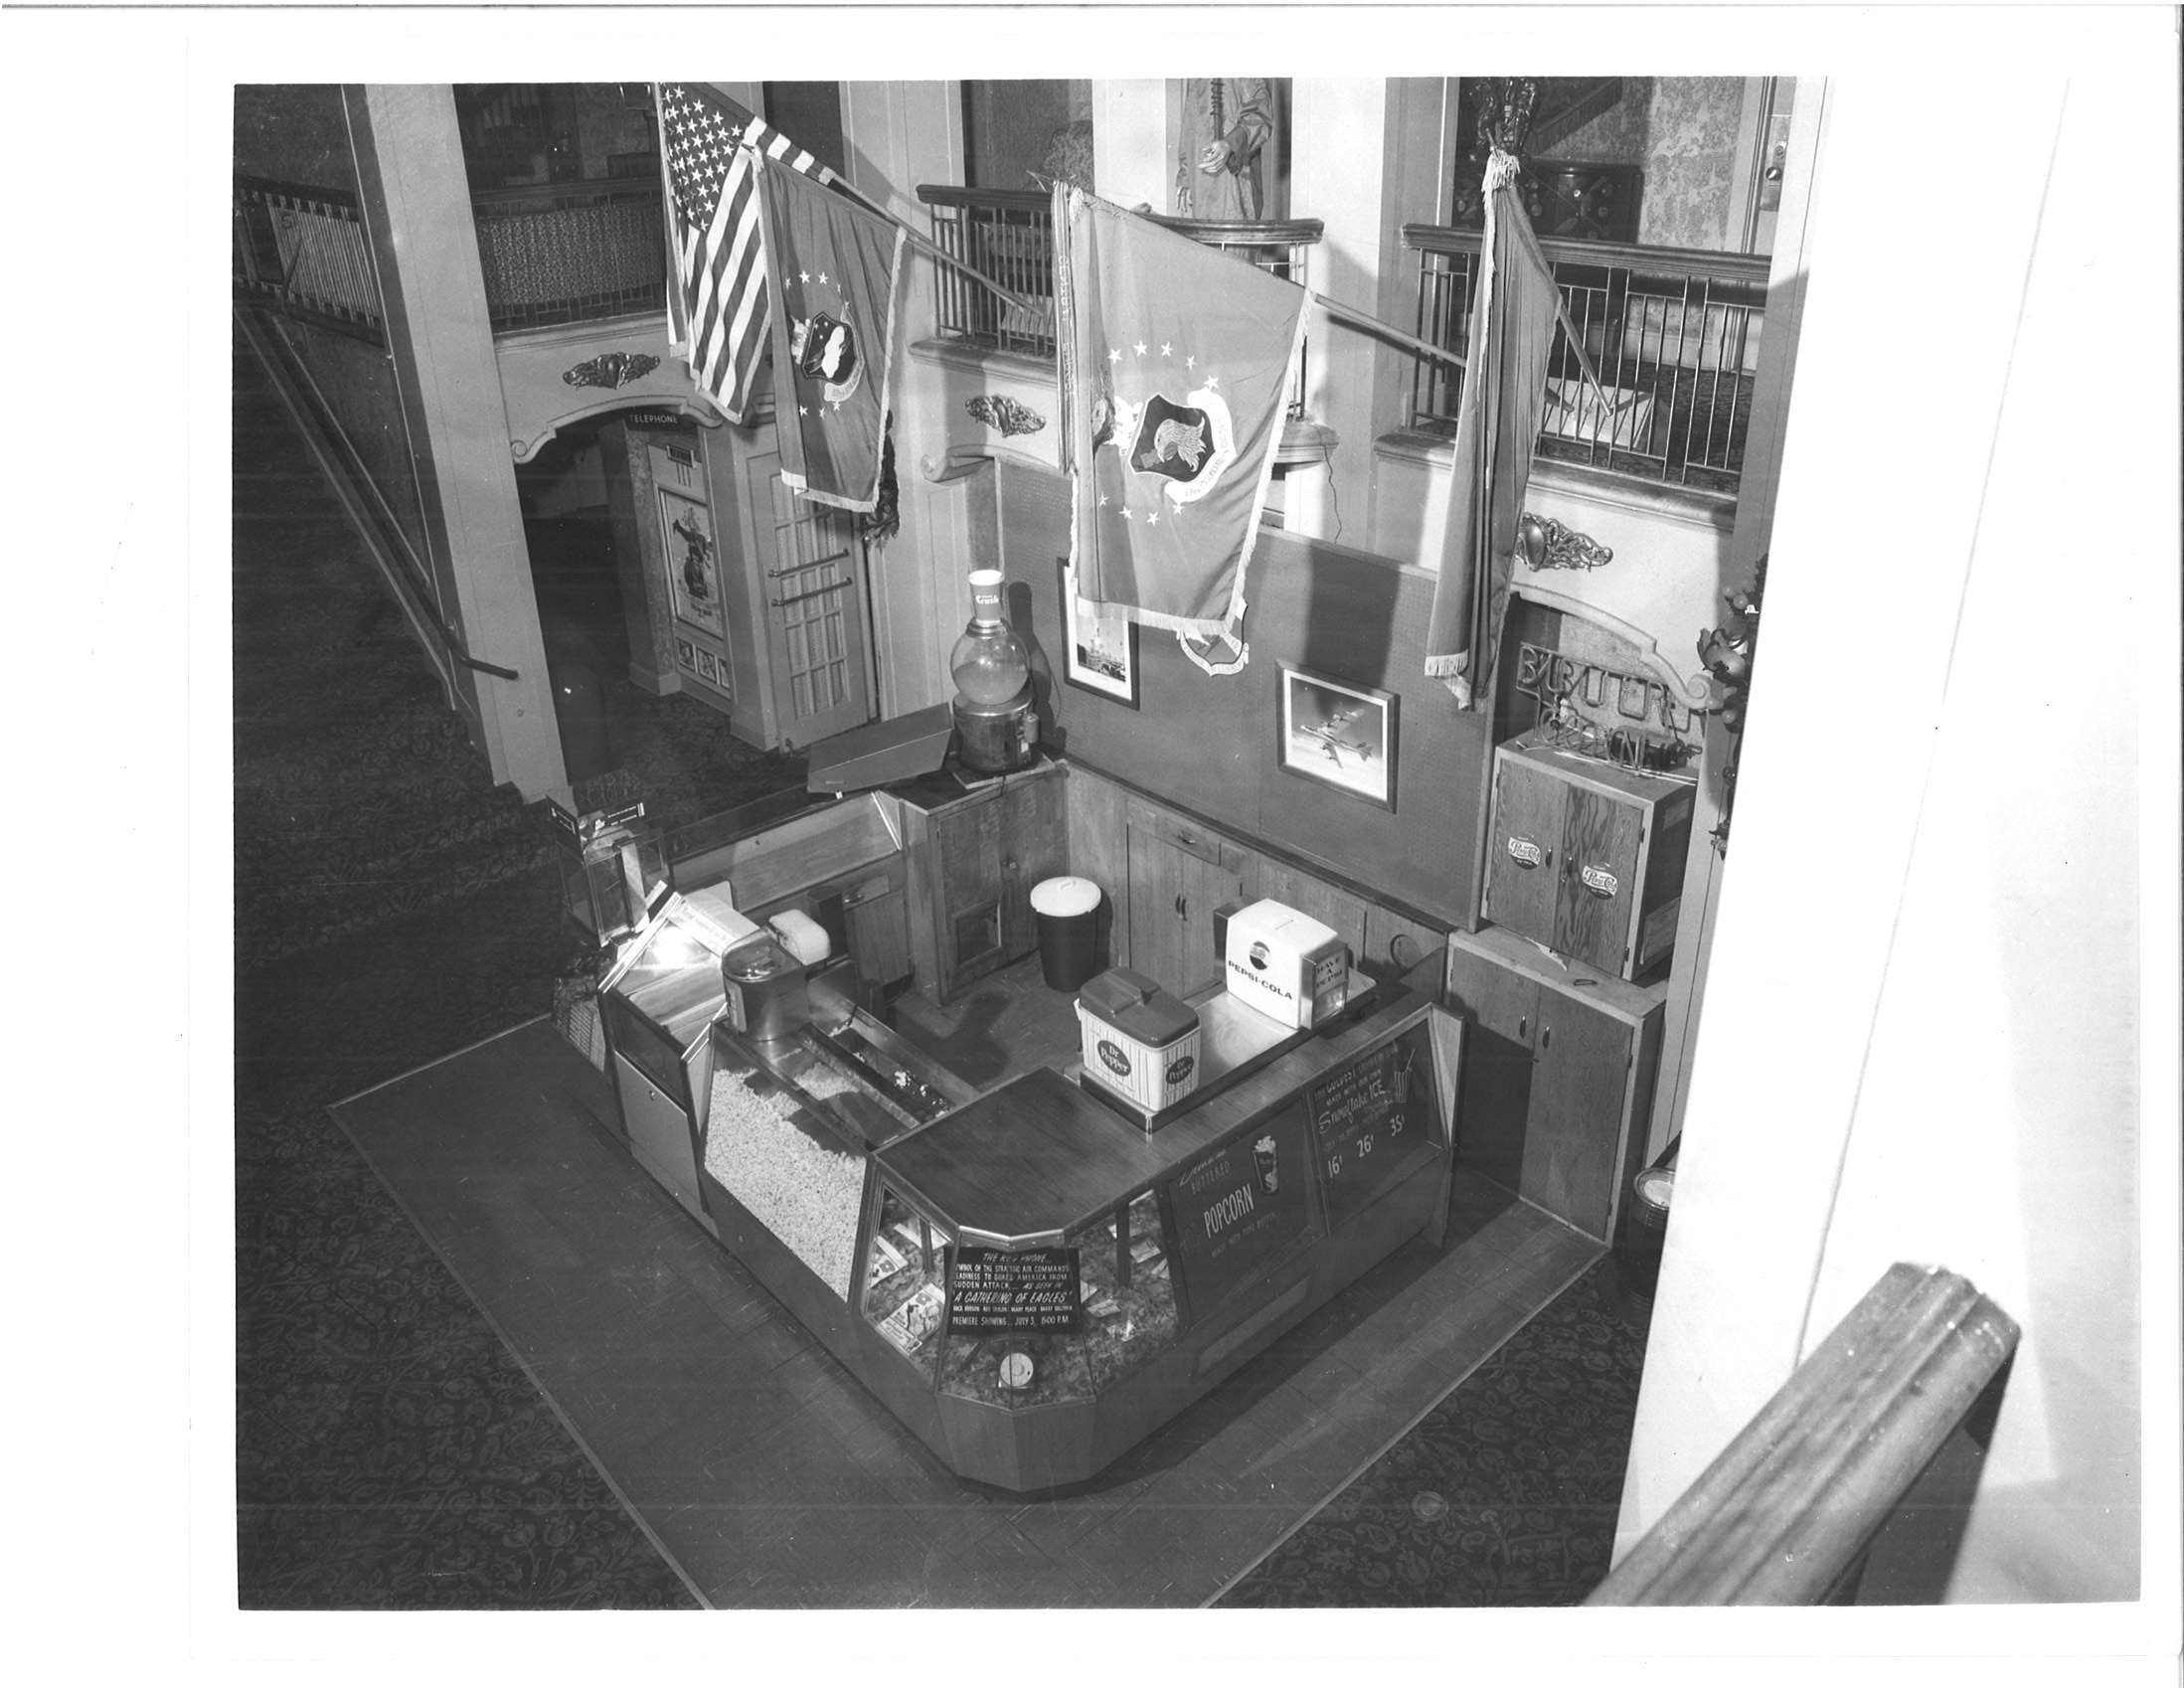 LOBBY CONCESSIONS STAND (Date Unknown)